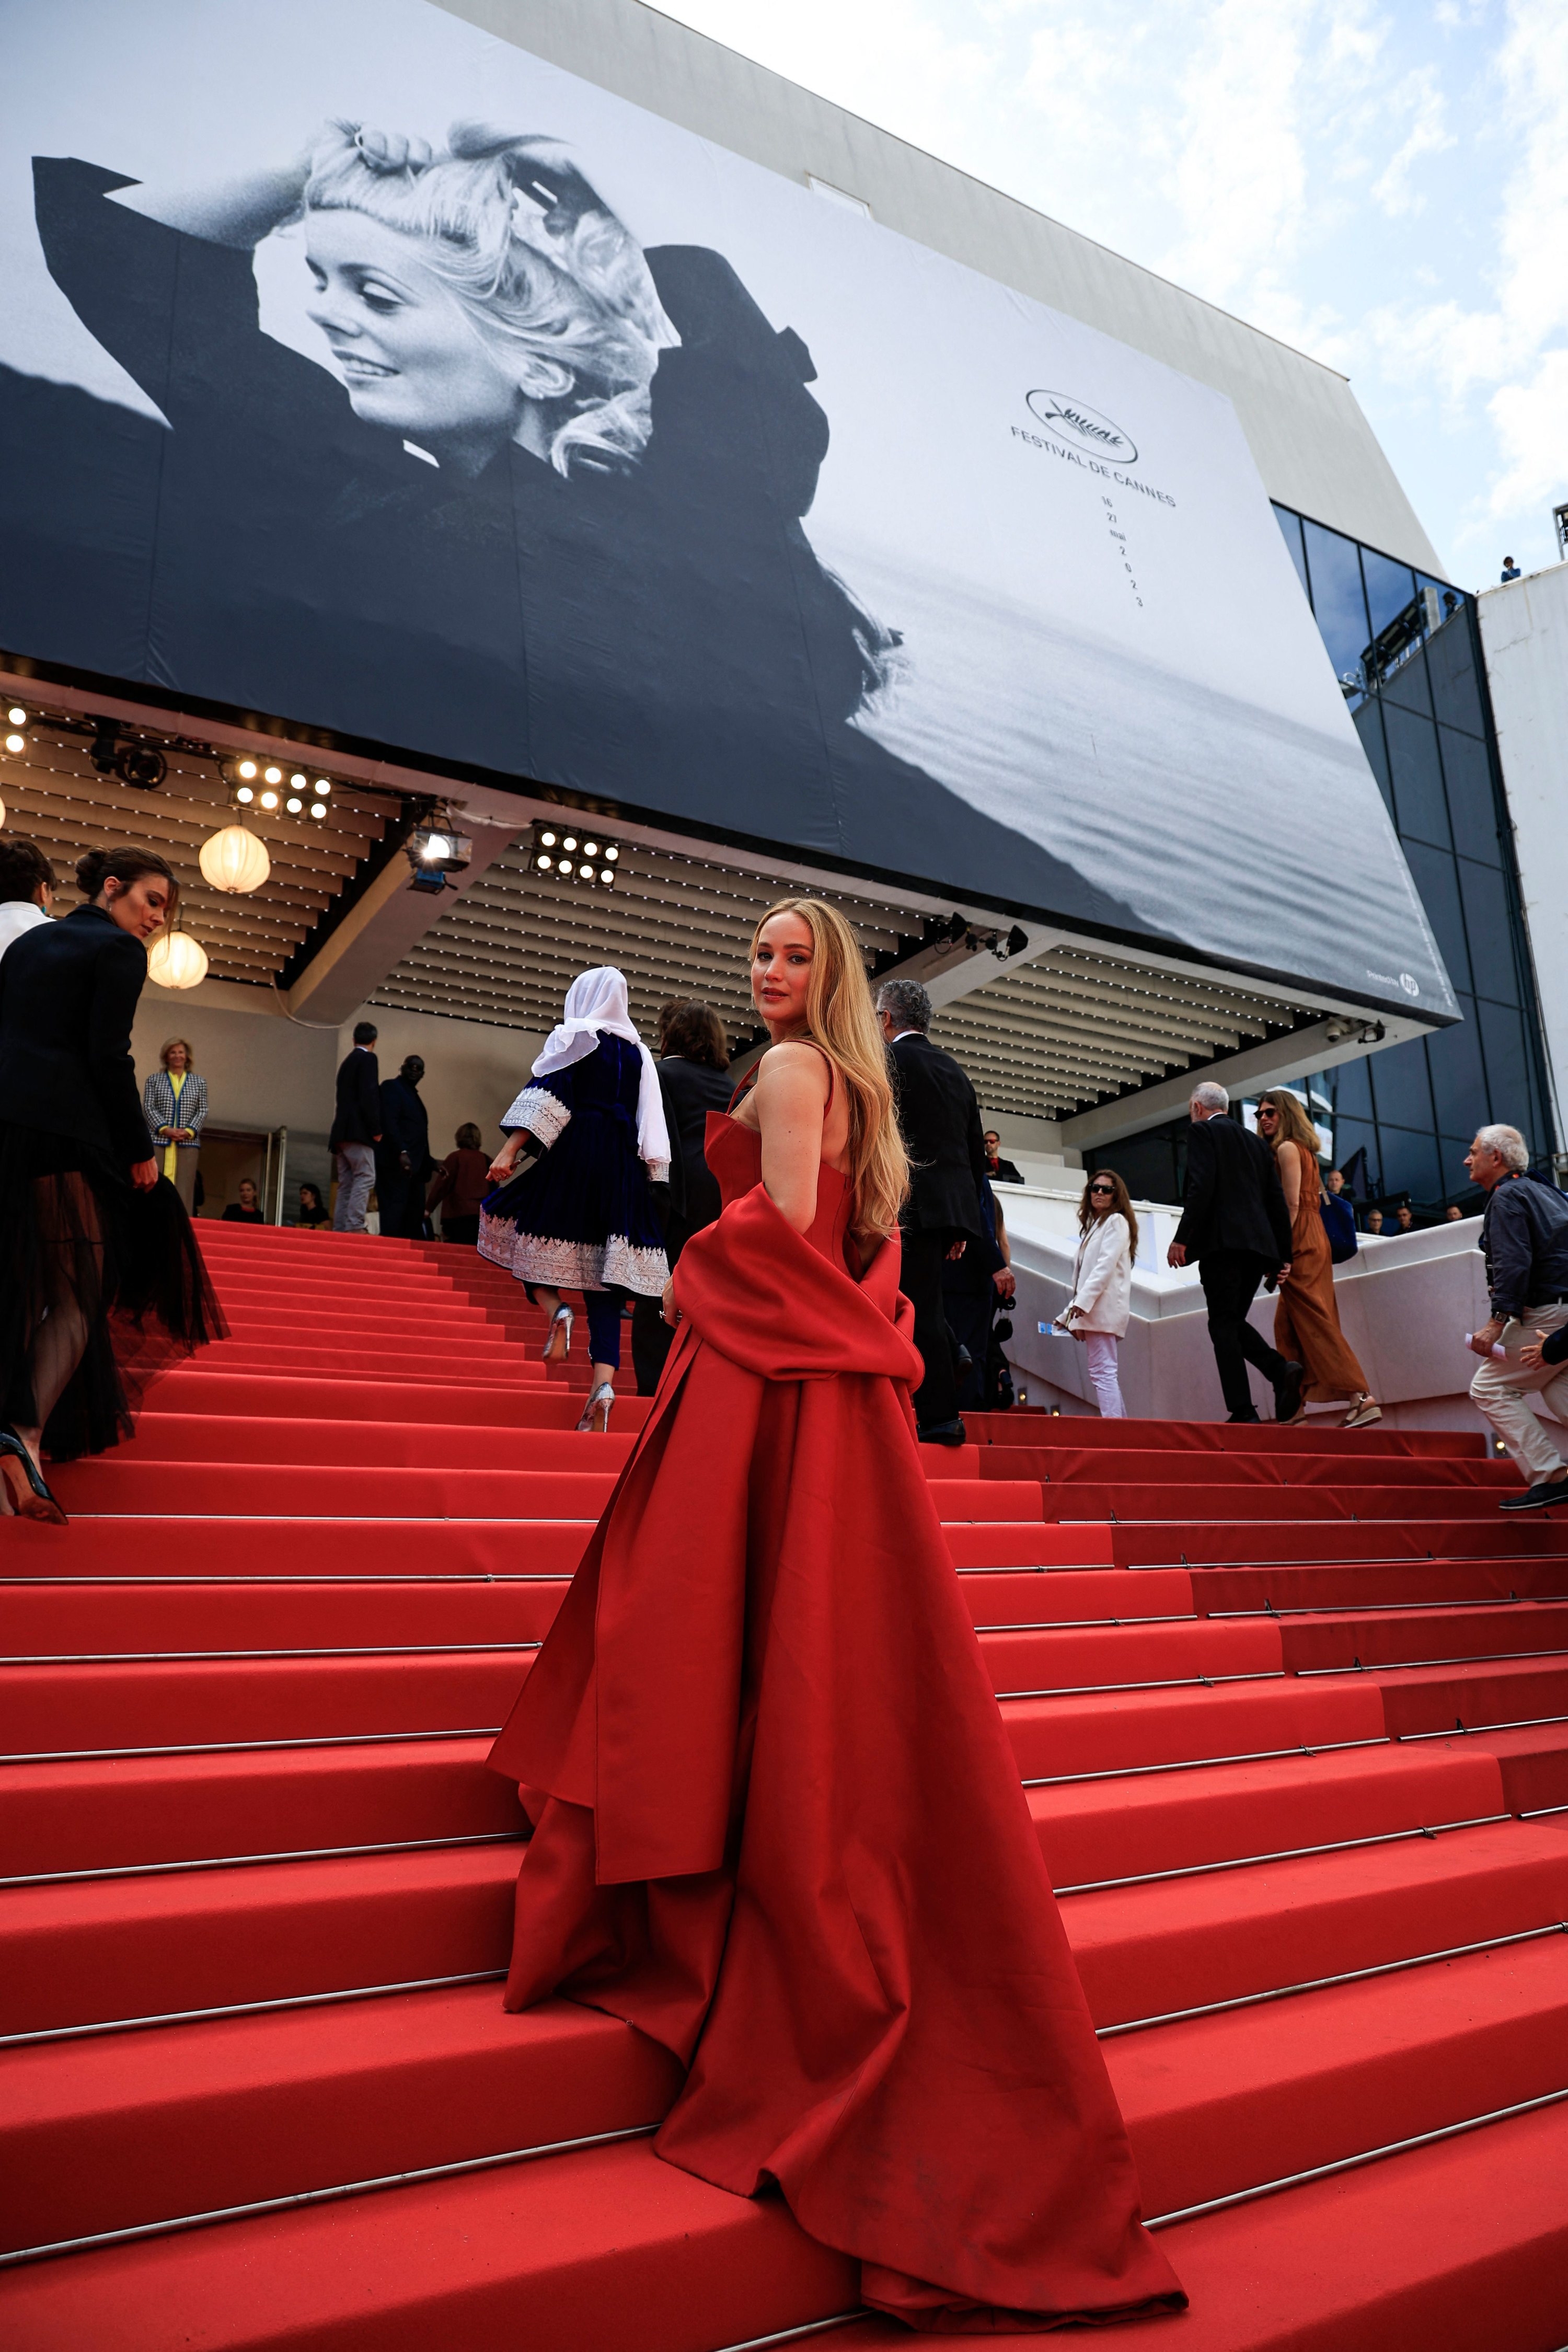 JLaw on the red carpet stairs in a spaghetti-strap red gown